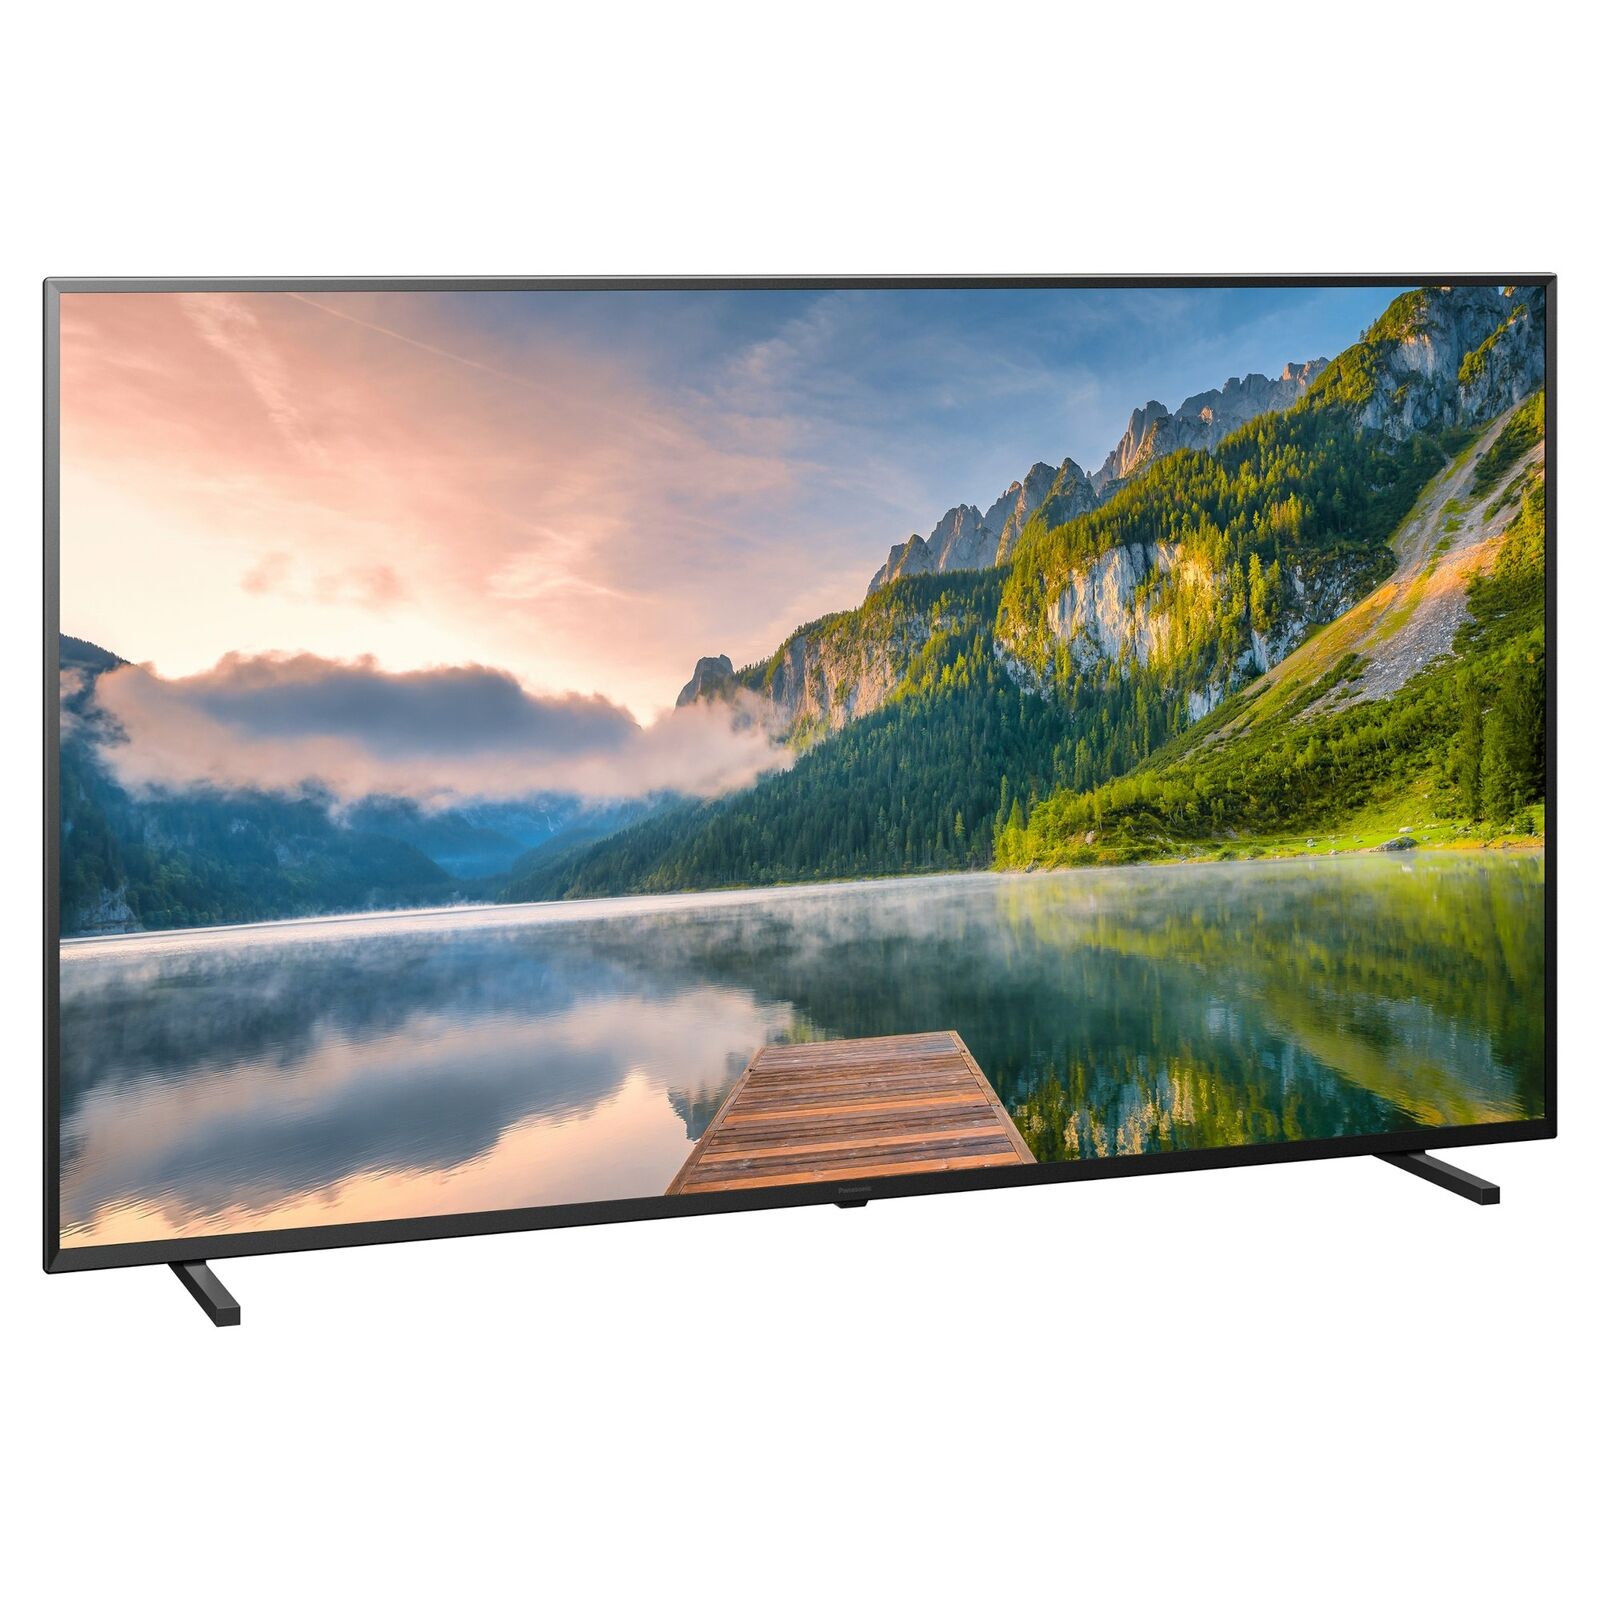 Panasonic TX-40JX800B LED 4K 40" Ultra HD Smart Android TV with Freeview Play, Black